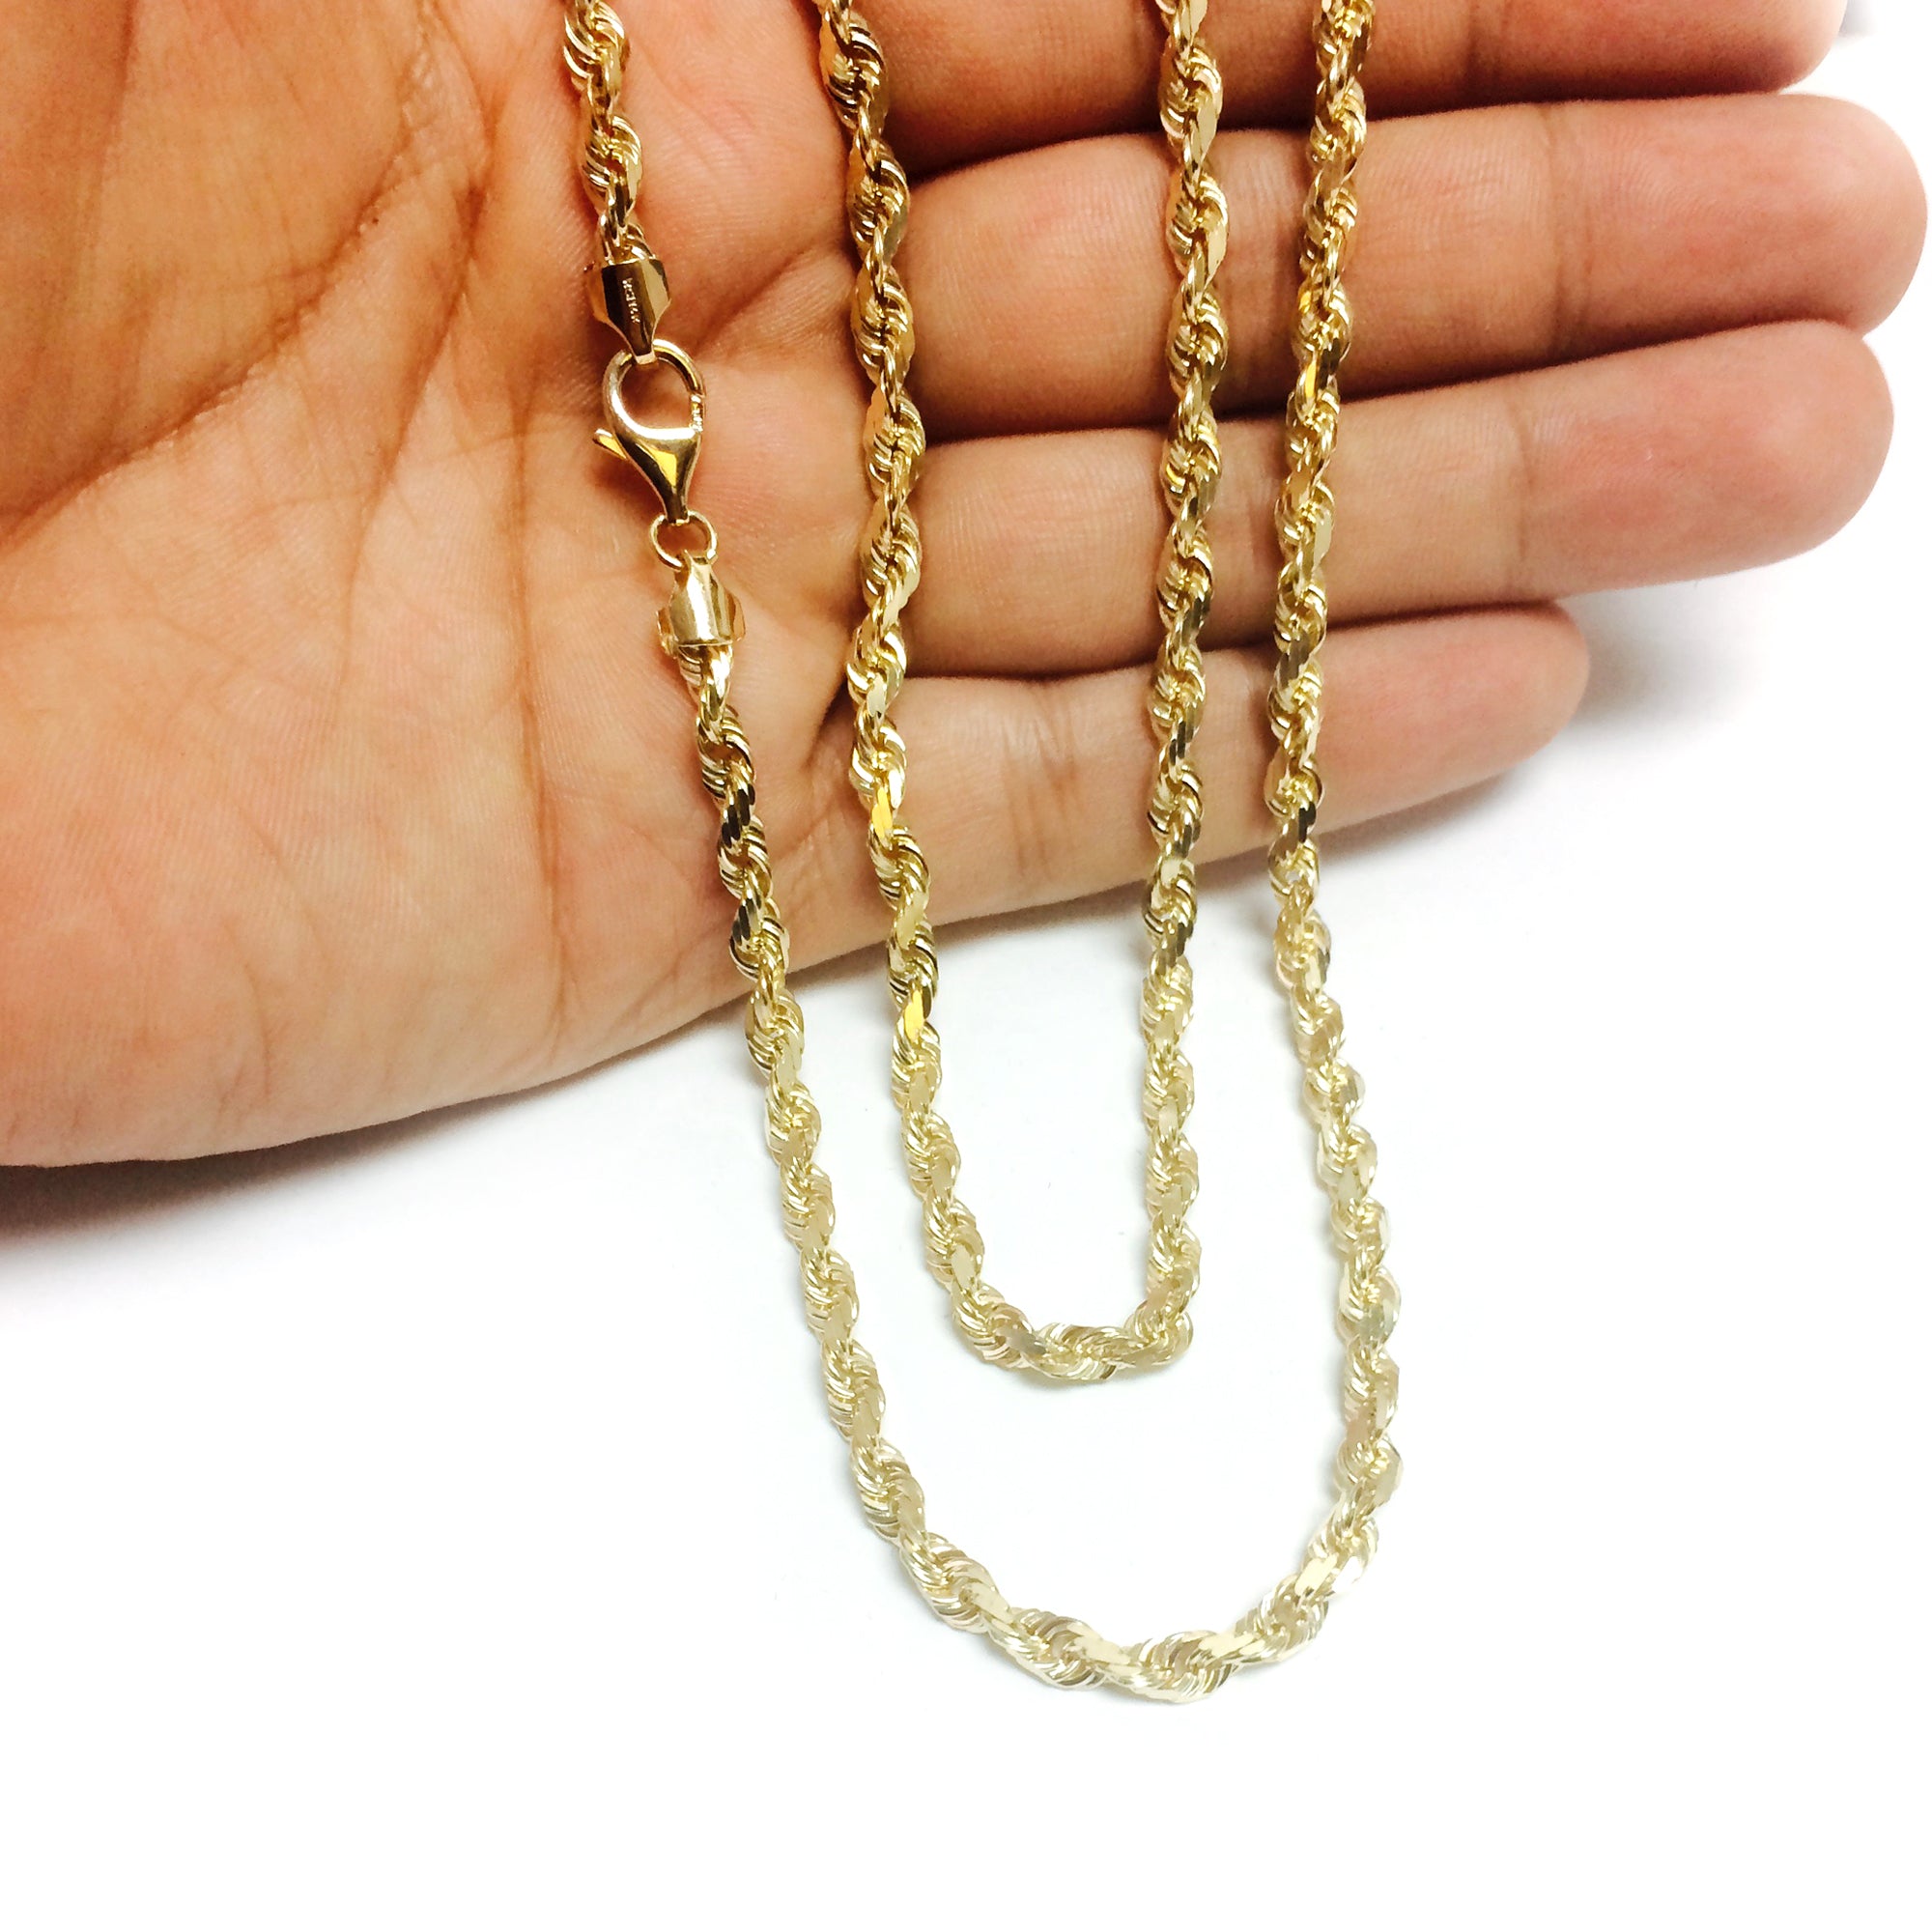 10k Yellow Solid Gold Diamond Cut Rope Chain Necklace, 5.0mm fine designer jewelry for men and women